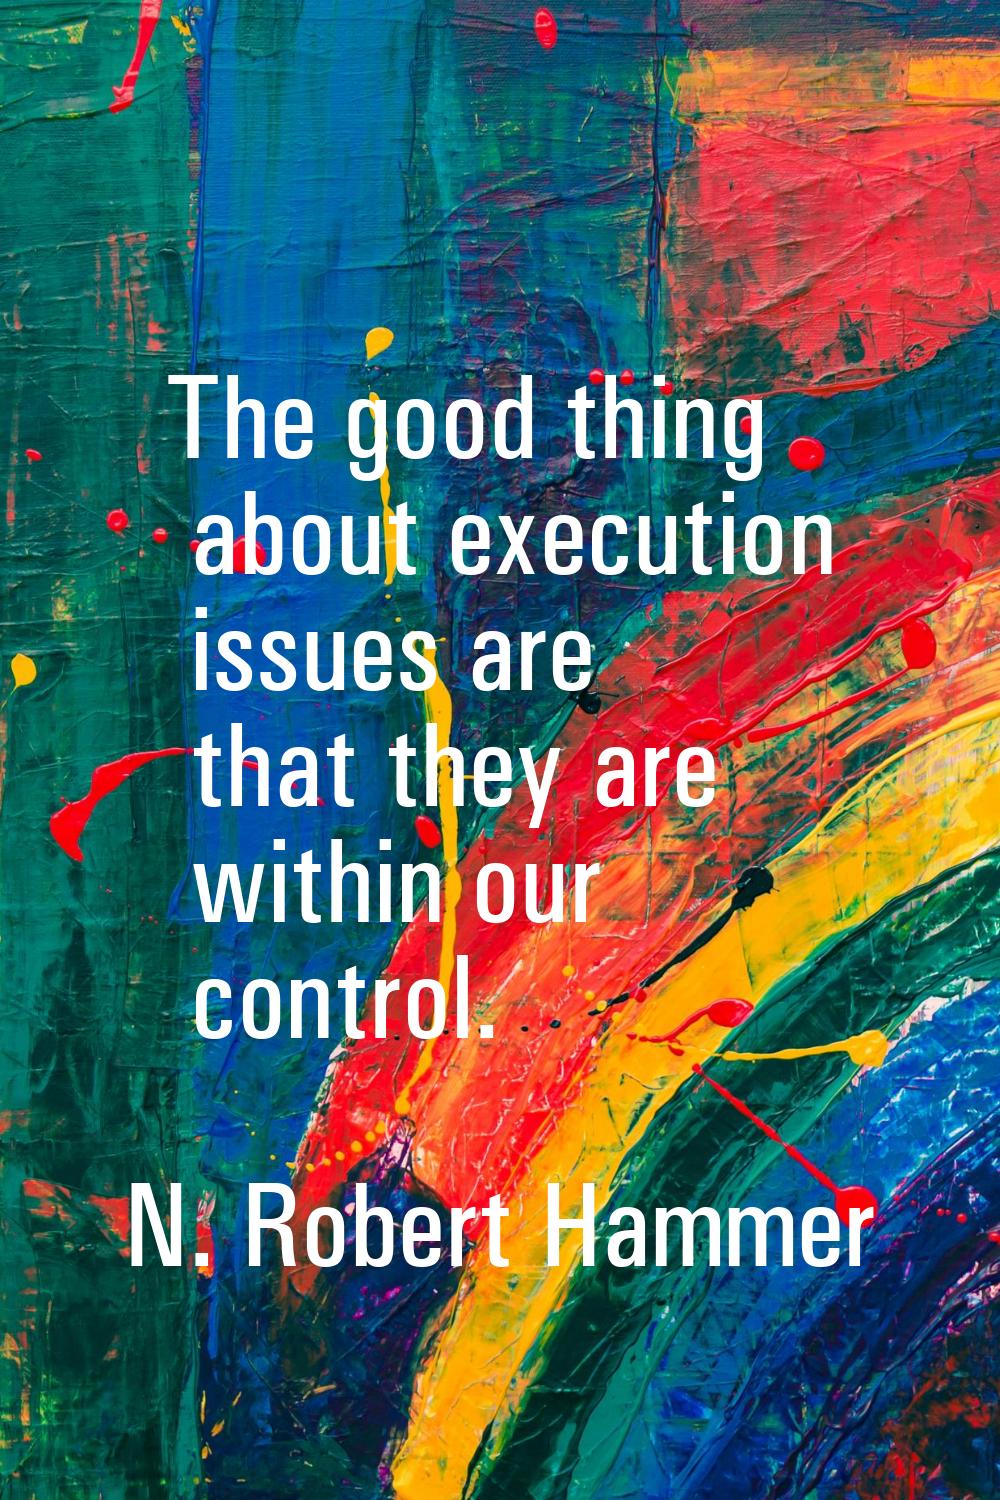 The good thing about execution issues are that they are within our control.